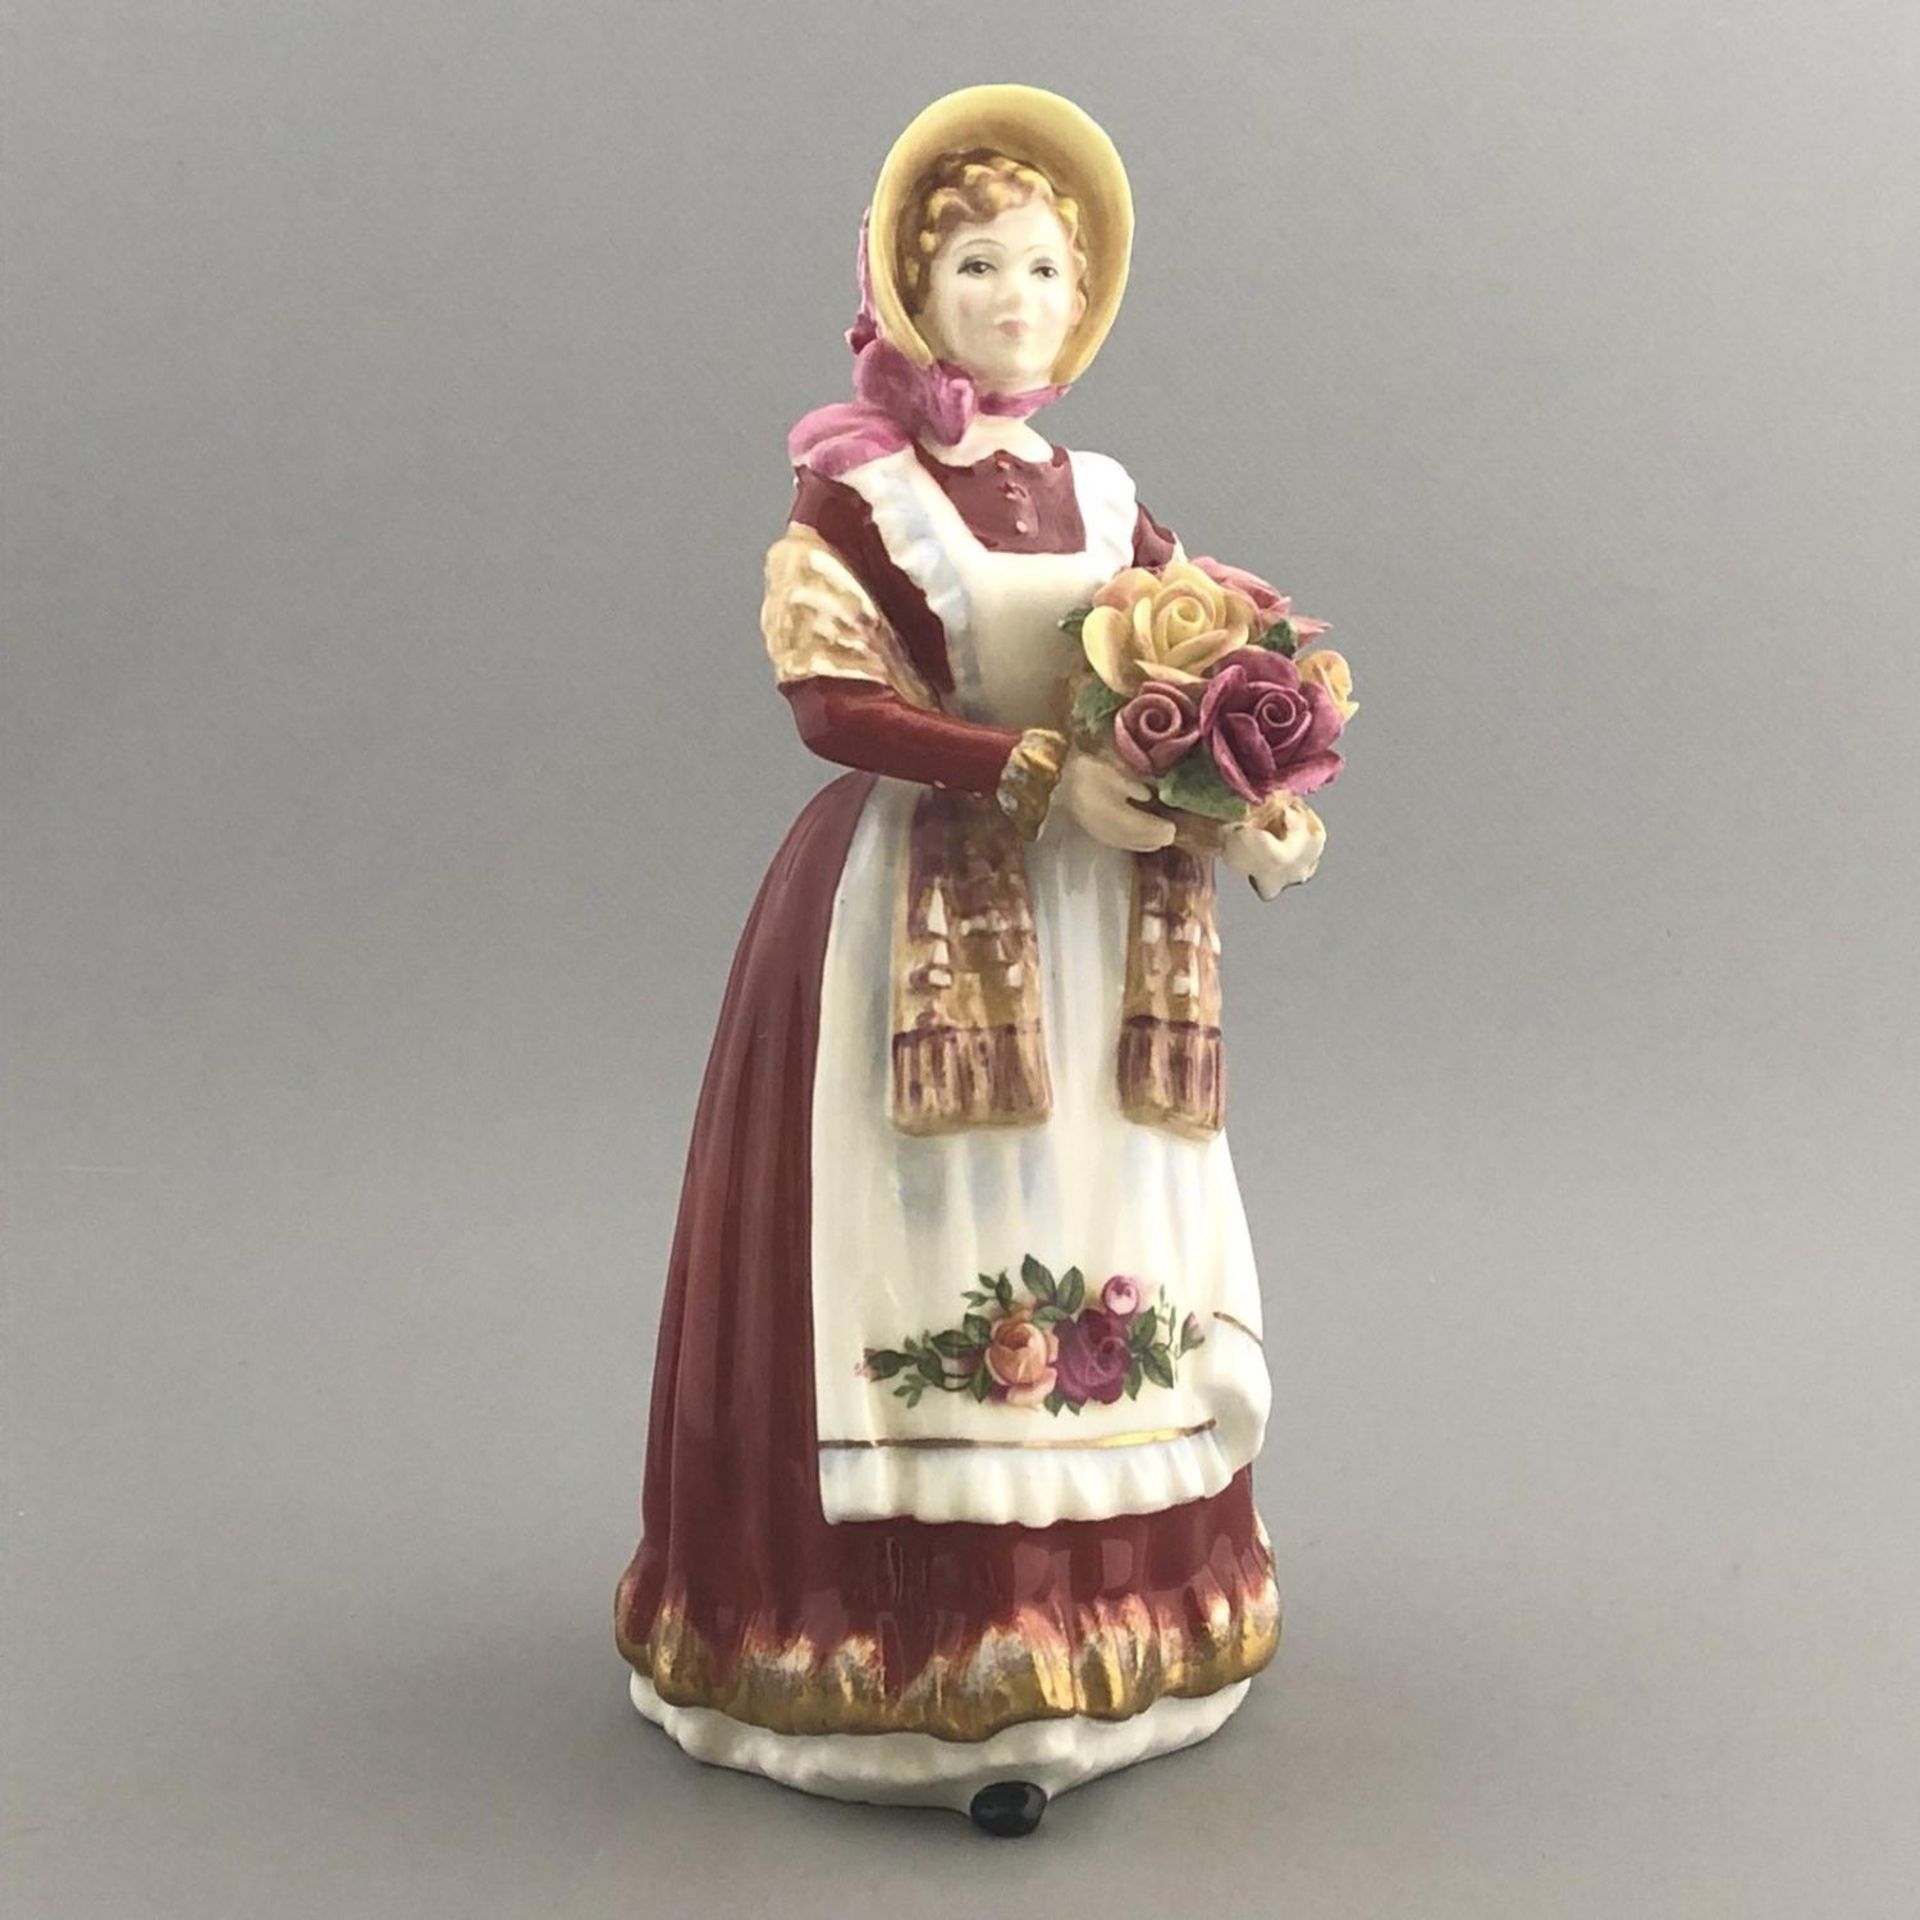 English Porcelain Figurine "Old Country Roses" - Royal Doulton HN 3692